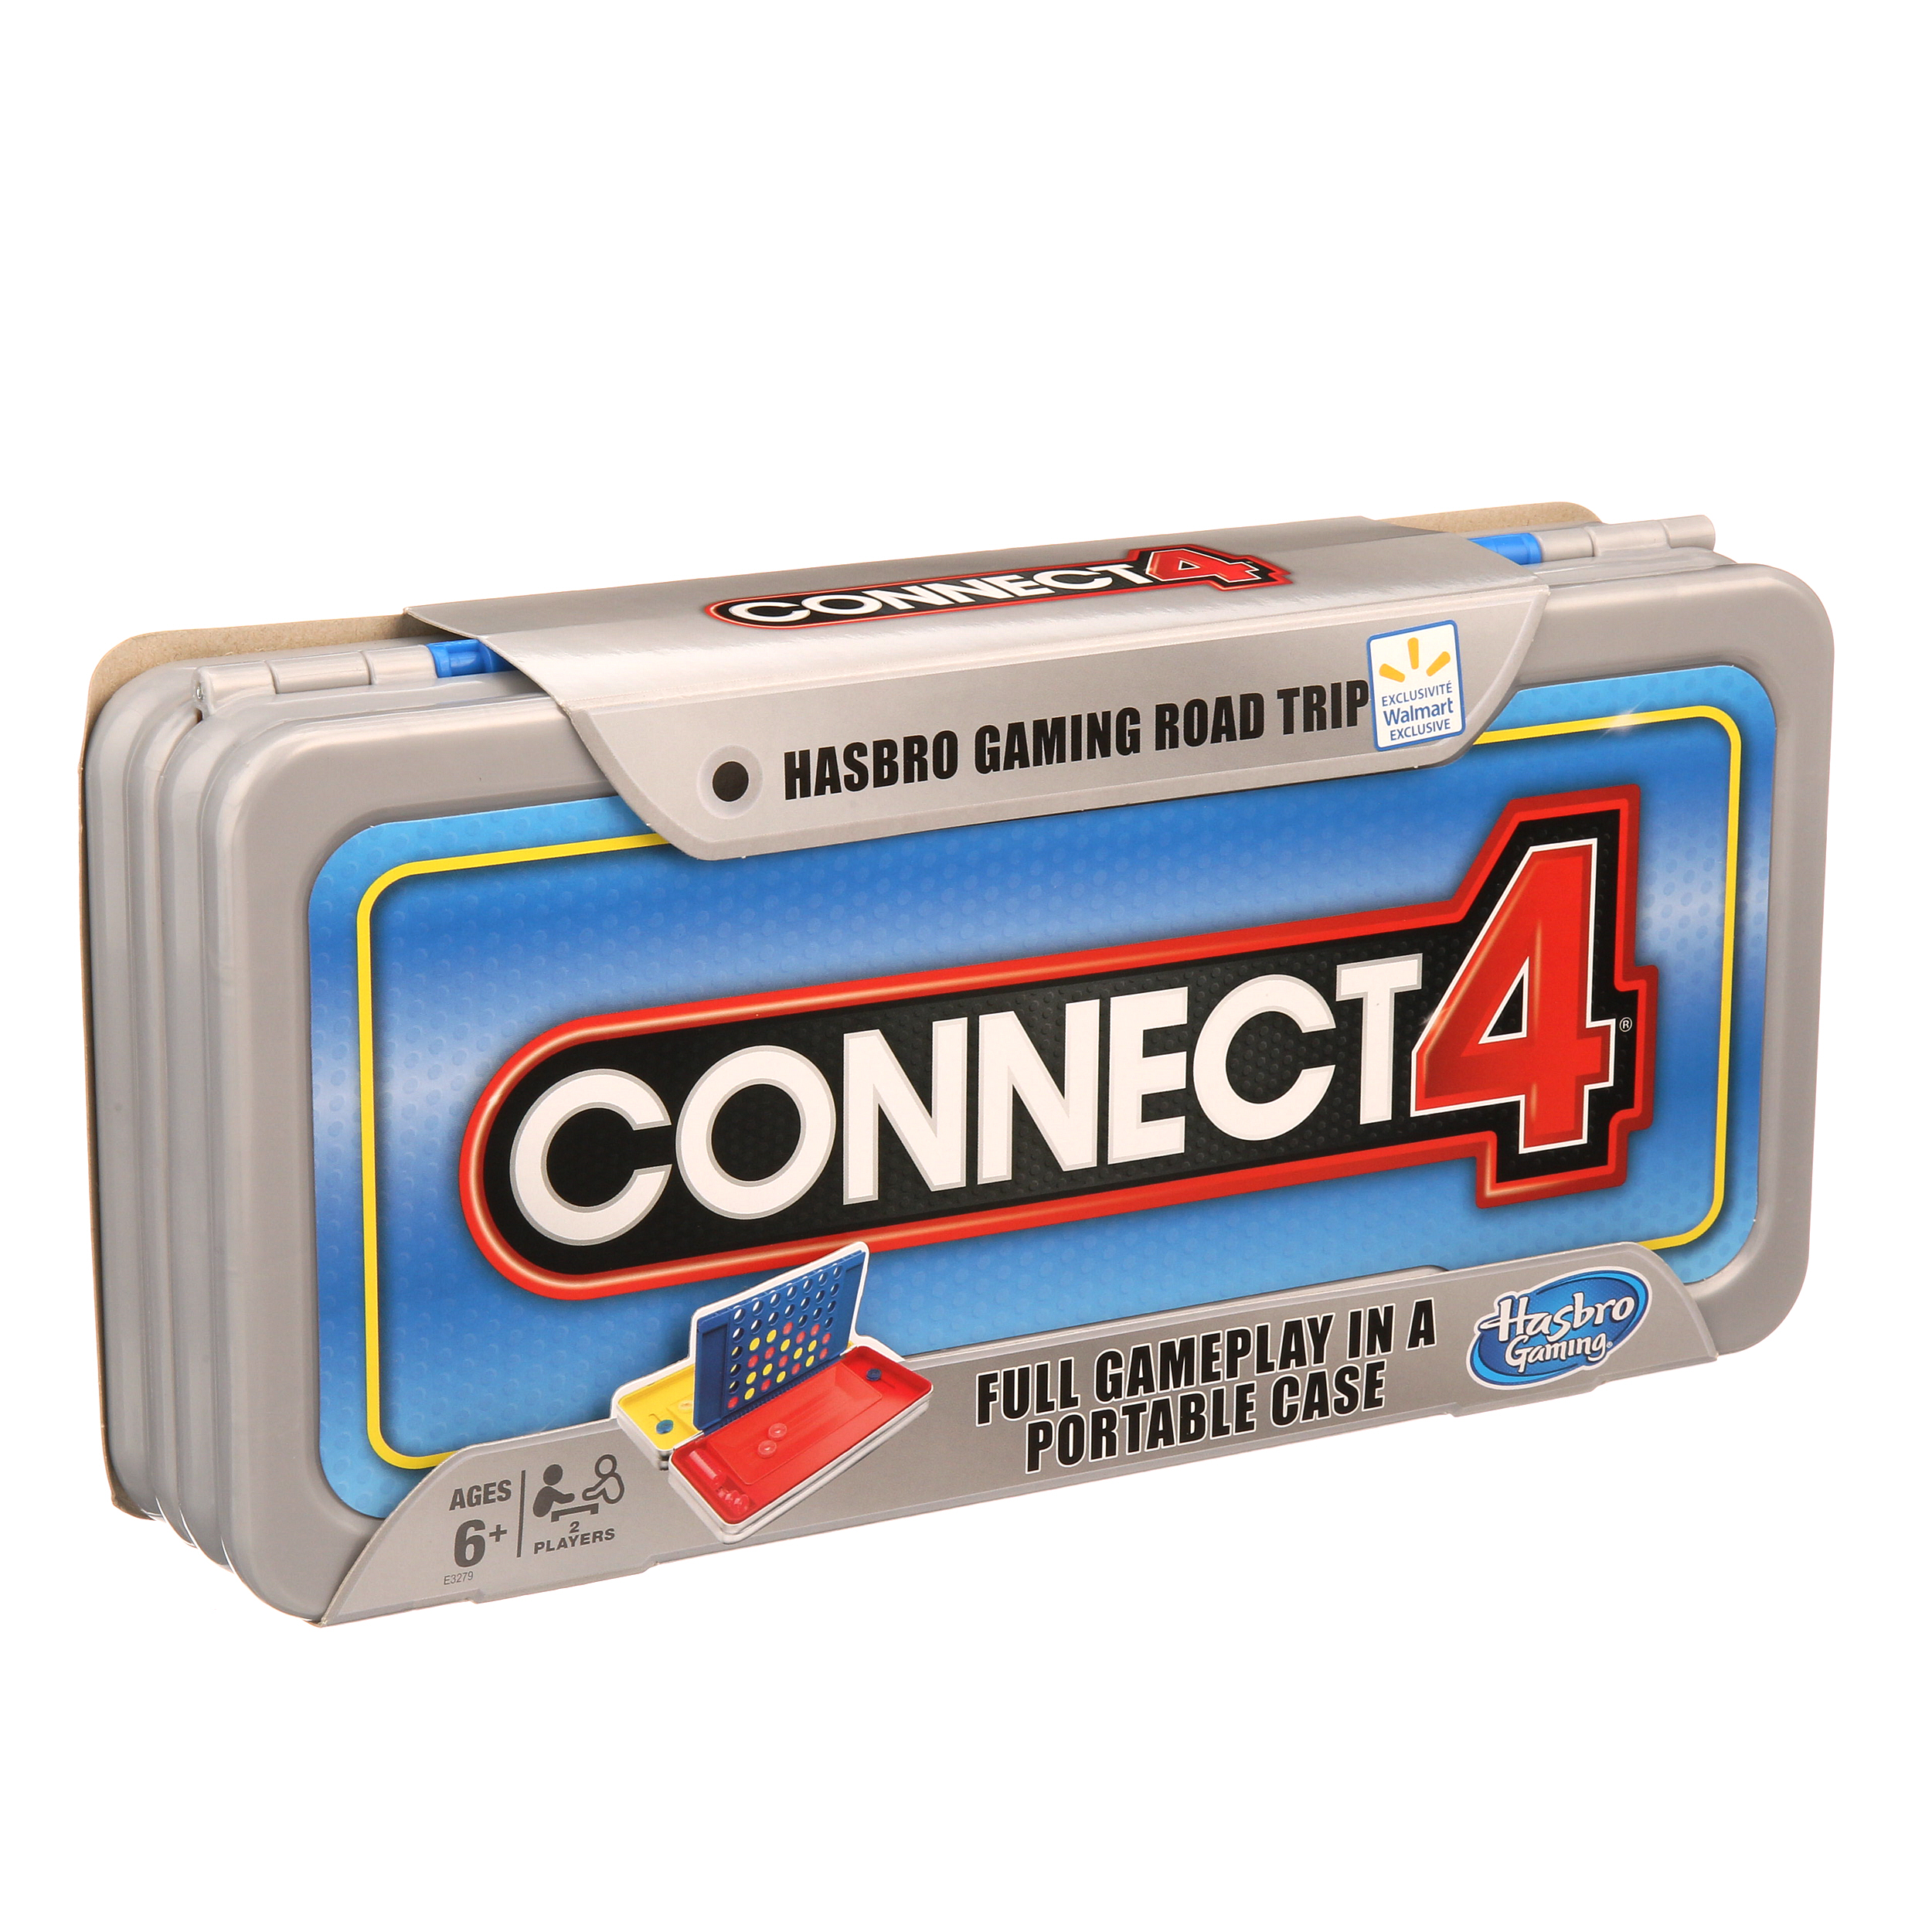 Hasbro Gaming Road Trip Series Connect 4 Board Game; Full Gameplay in Portable Case - image 2 of 2